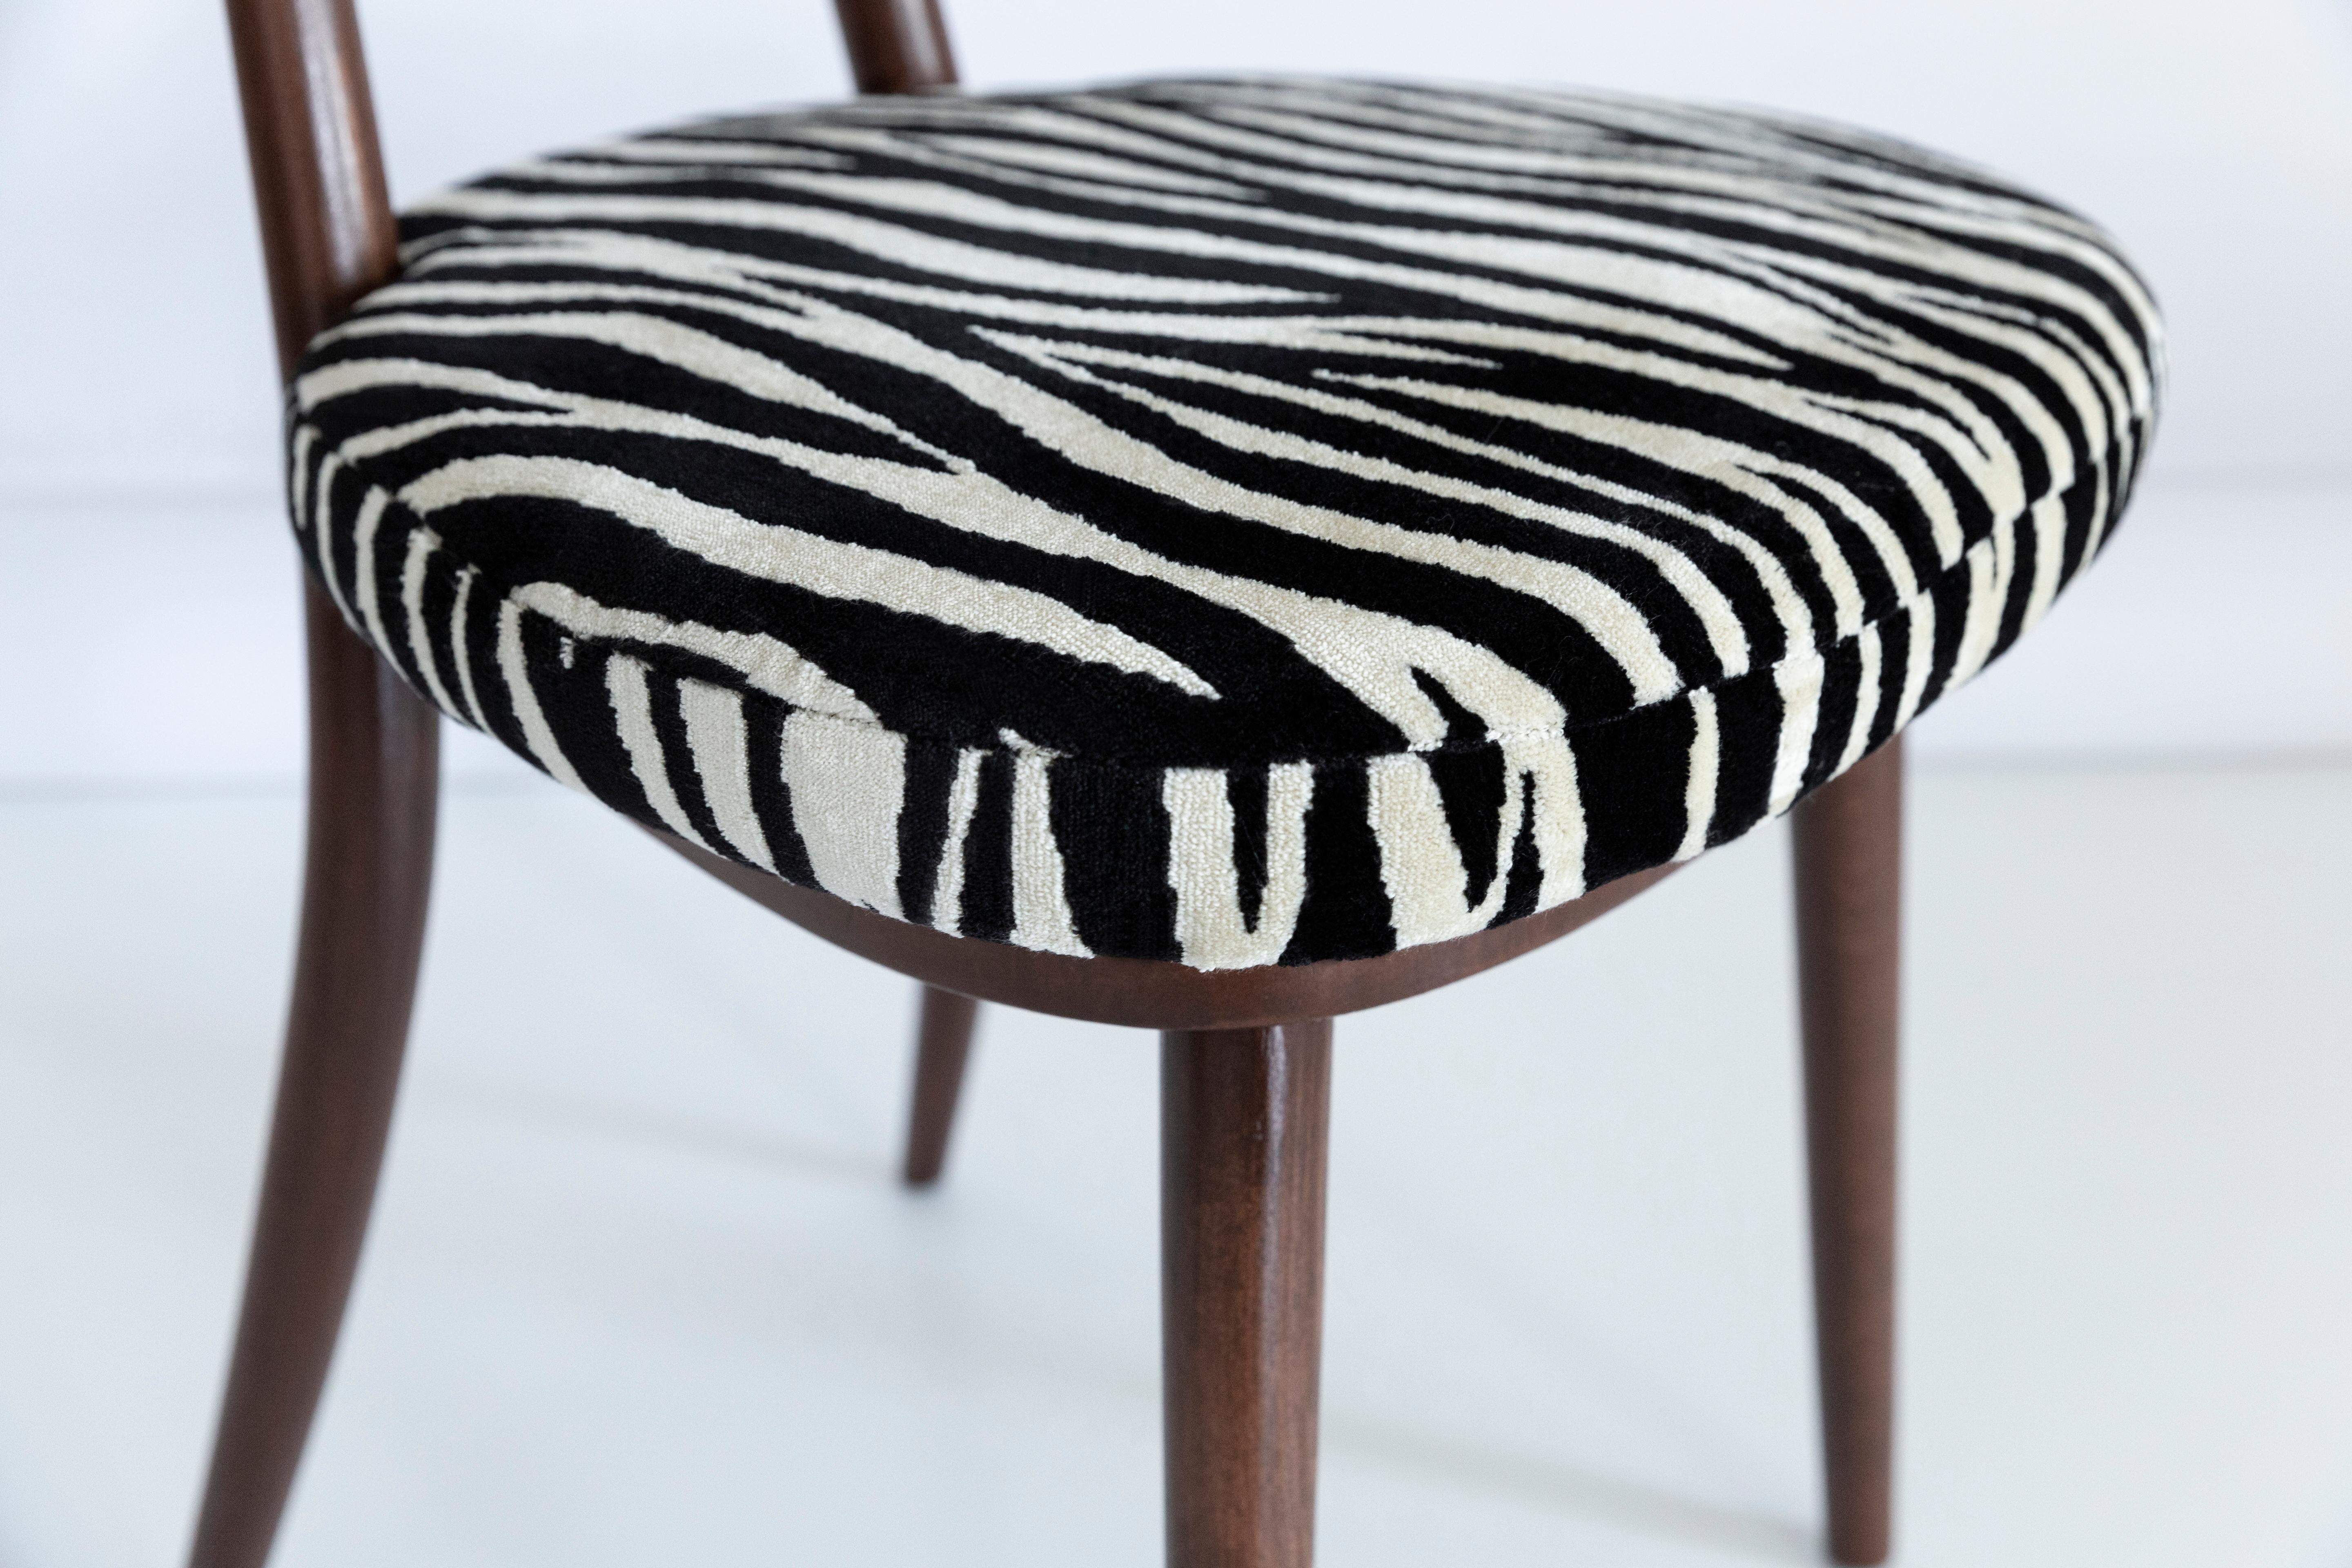 Set of Four Midcentury Zebra Black and White Heart Chairs, Poland, 1960s For Sale 2